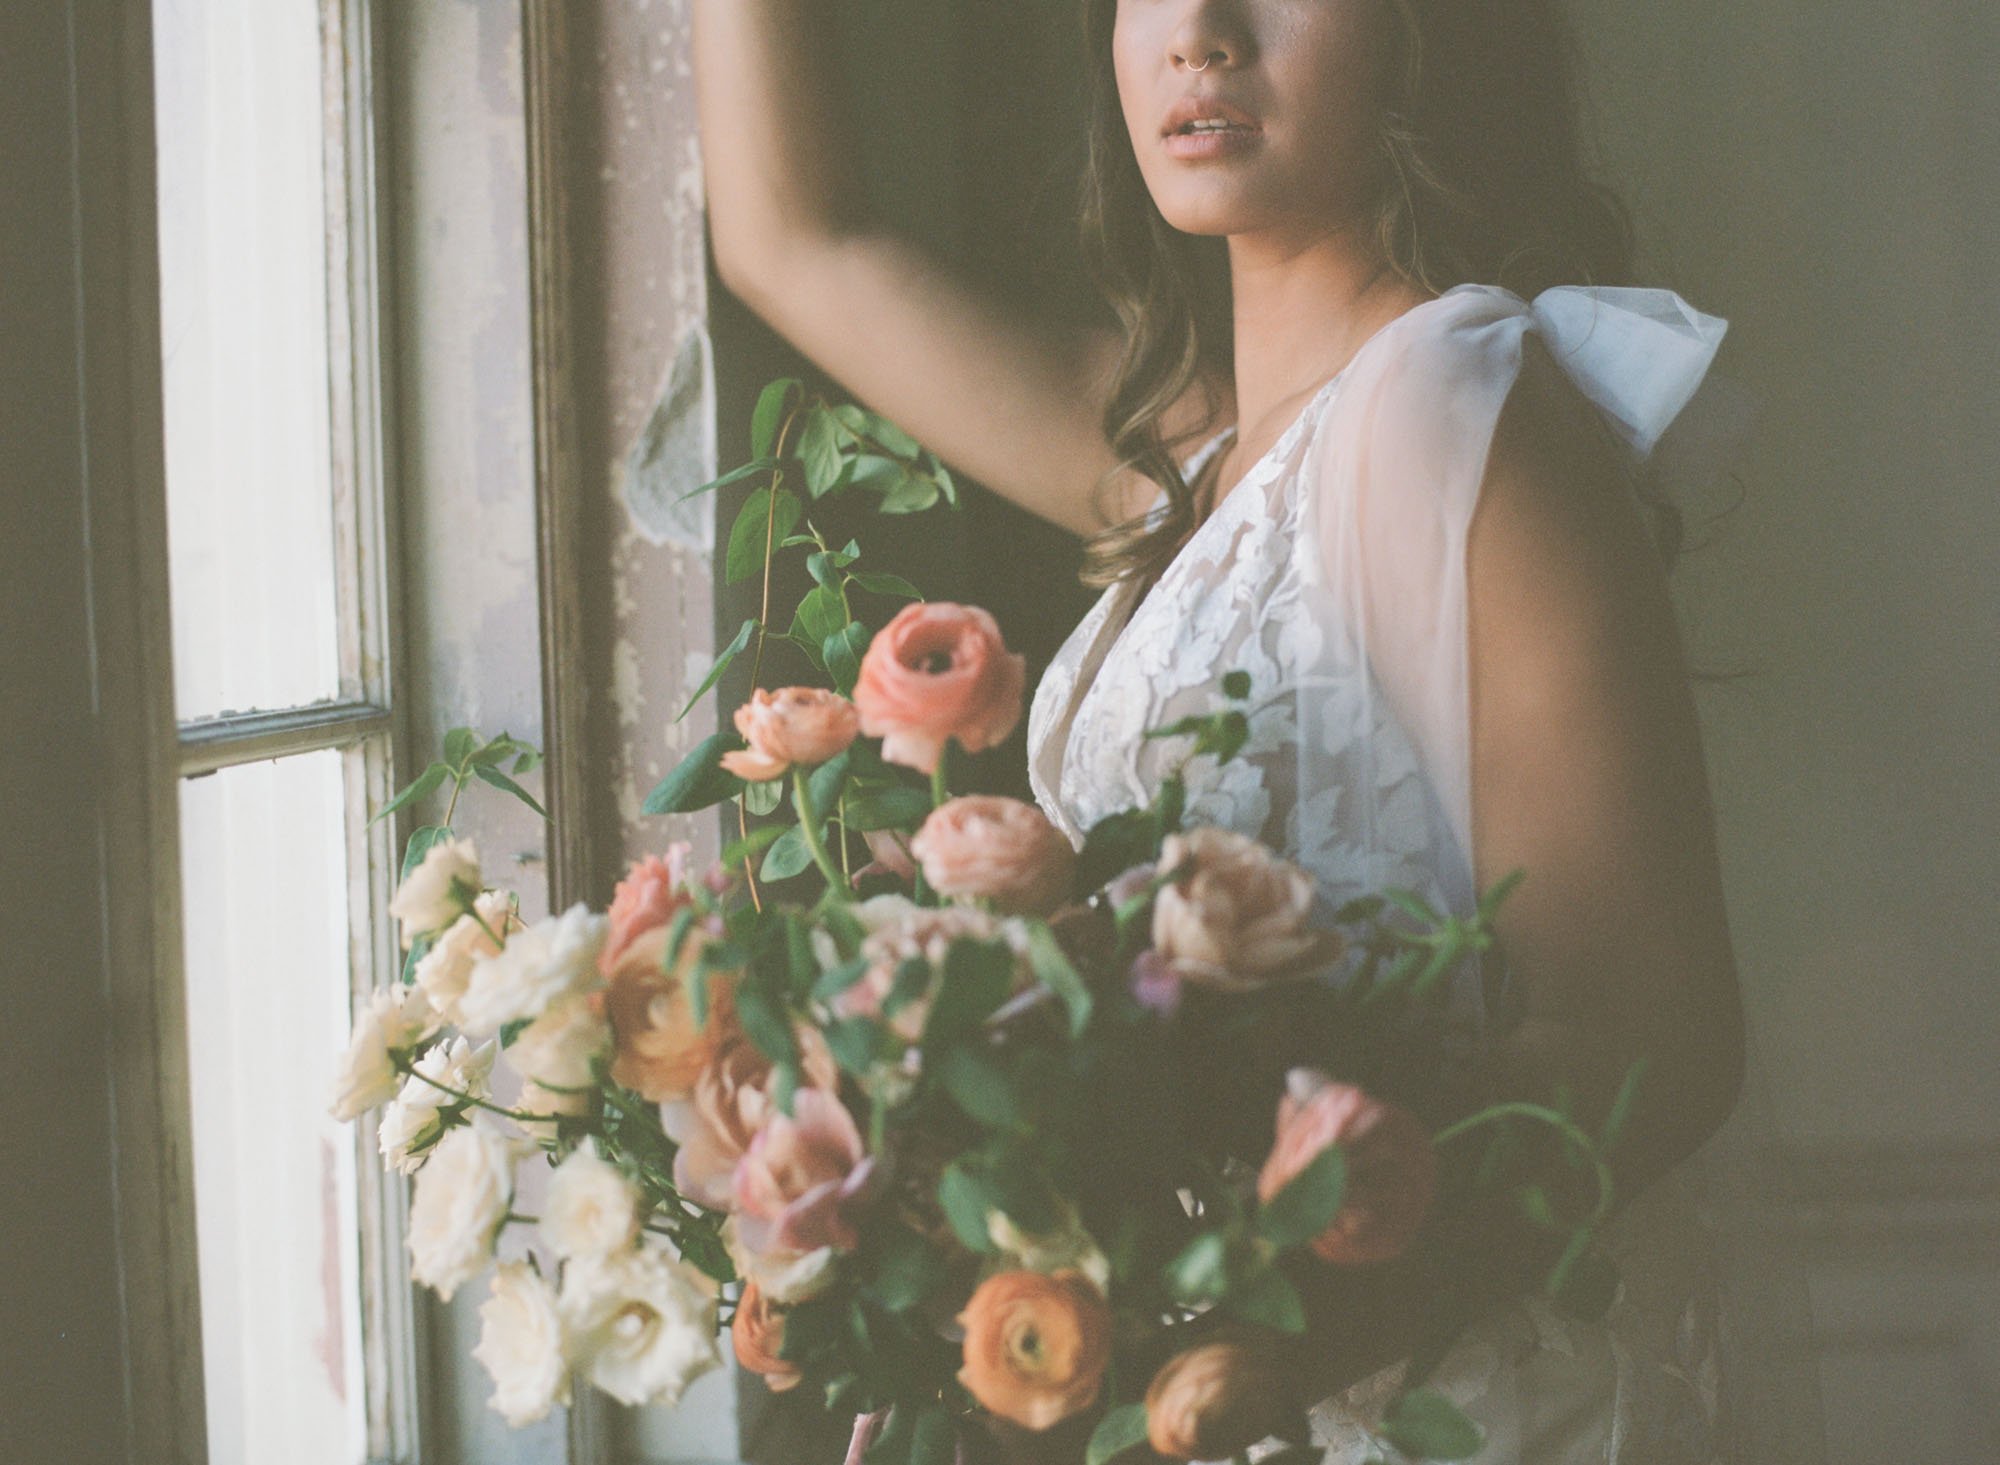  A bride wearing Made With Love Elsie and holding a large floral bridal bouquet consisting of pink ranunculus, white roses, and wild greenery. She is standing in front of an old window with one arm perched up on the window frame.  